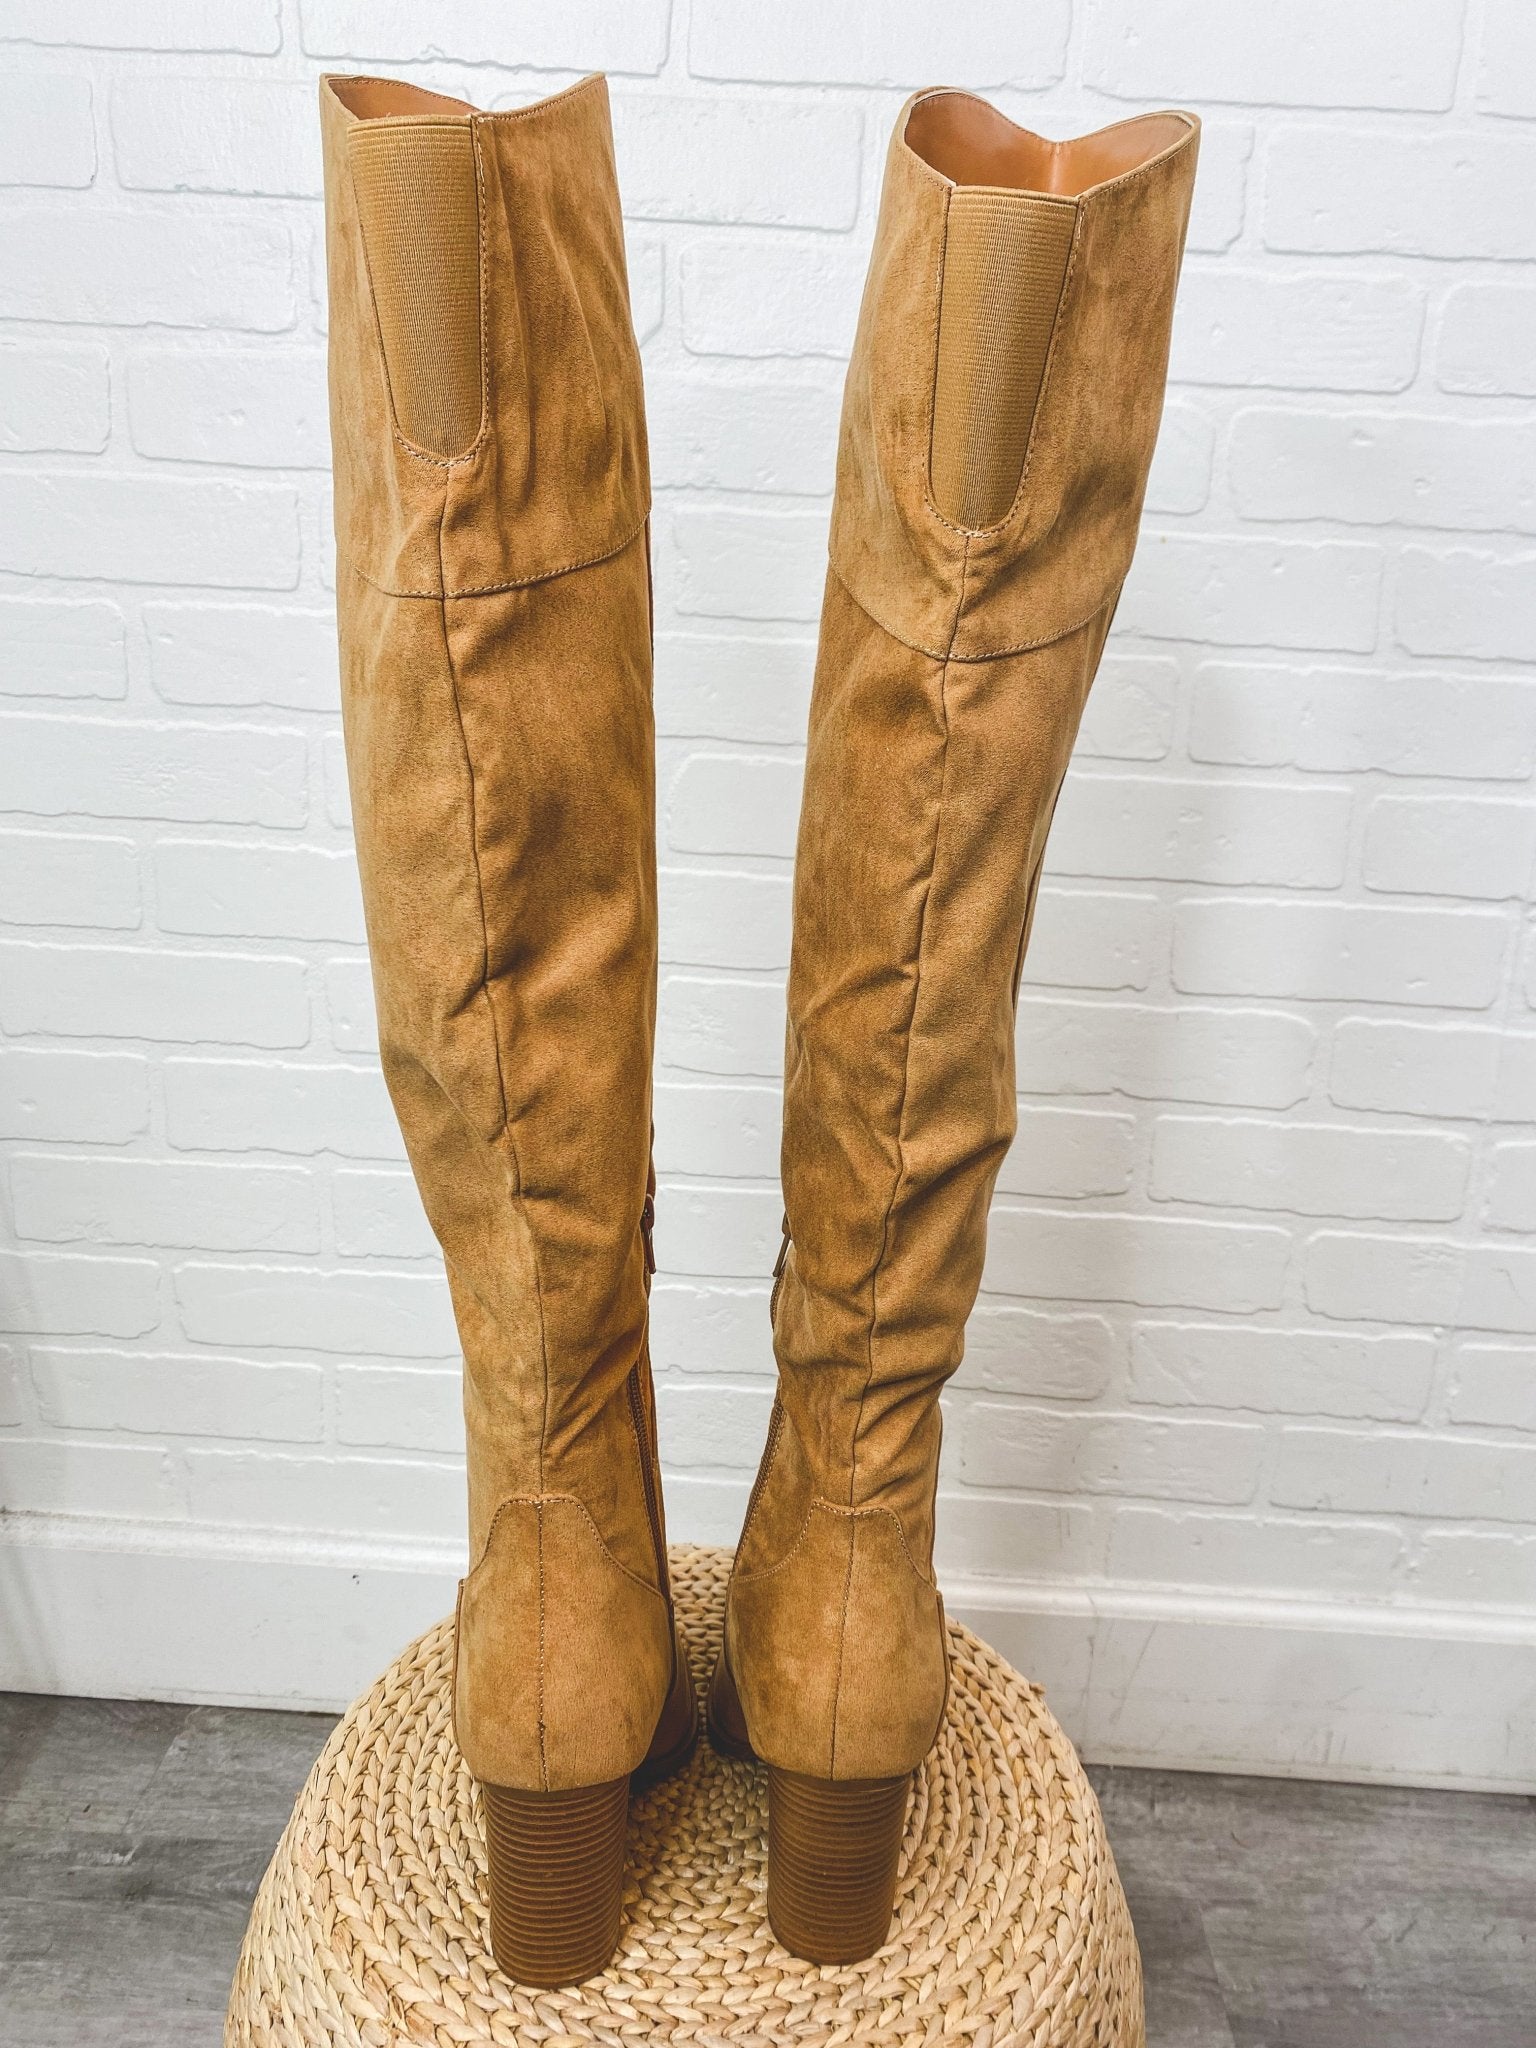 Slay over the knee boots butterscotch - Affordable boots - Boutique Shoes at Lush Fashion Lounge Boutique in Oklahoma City